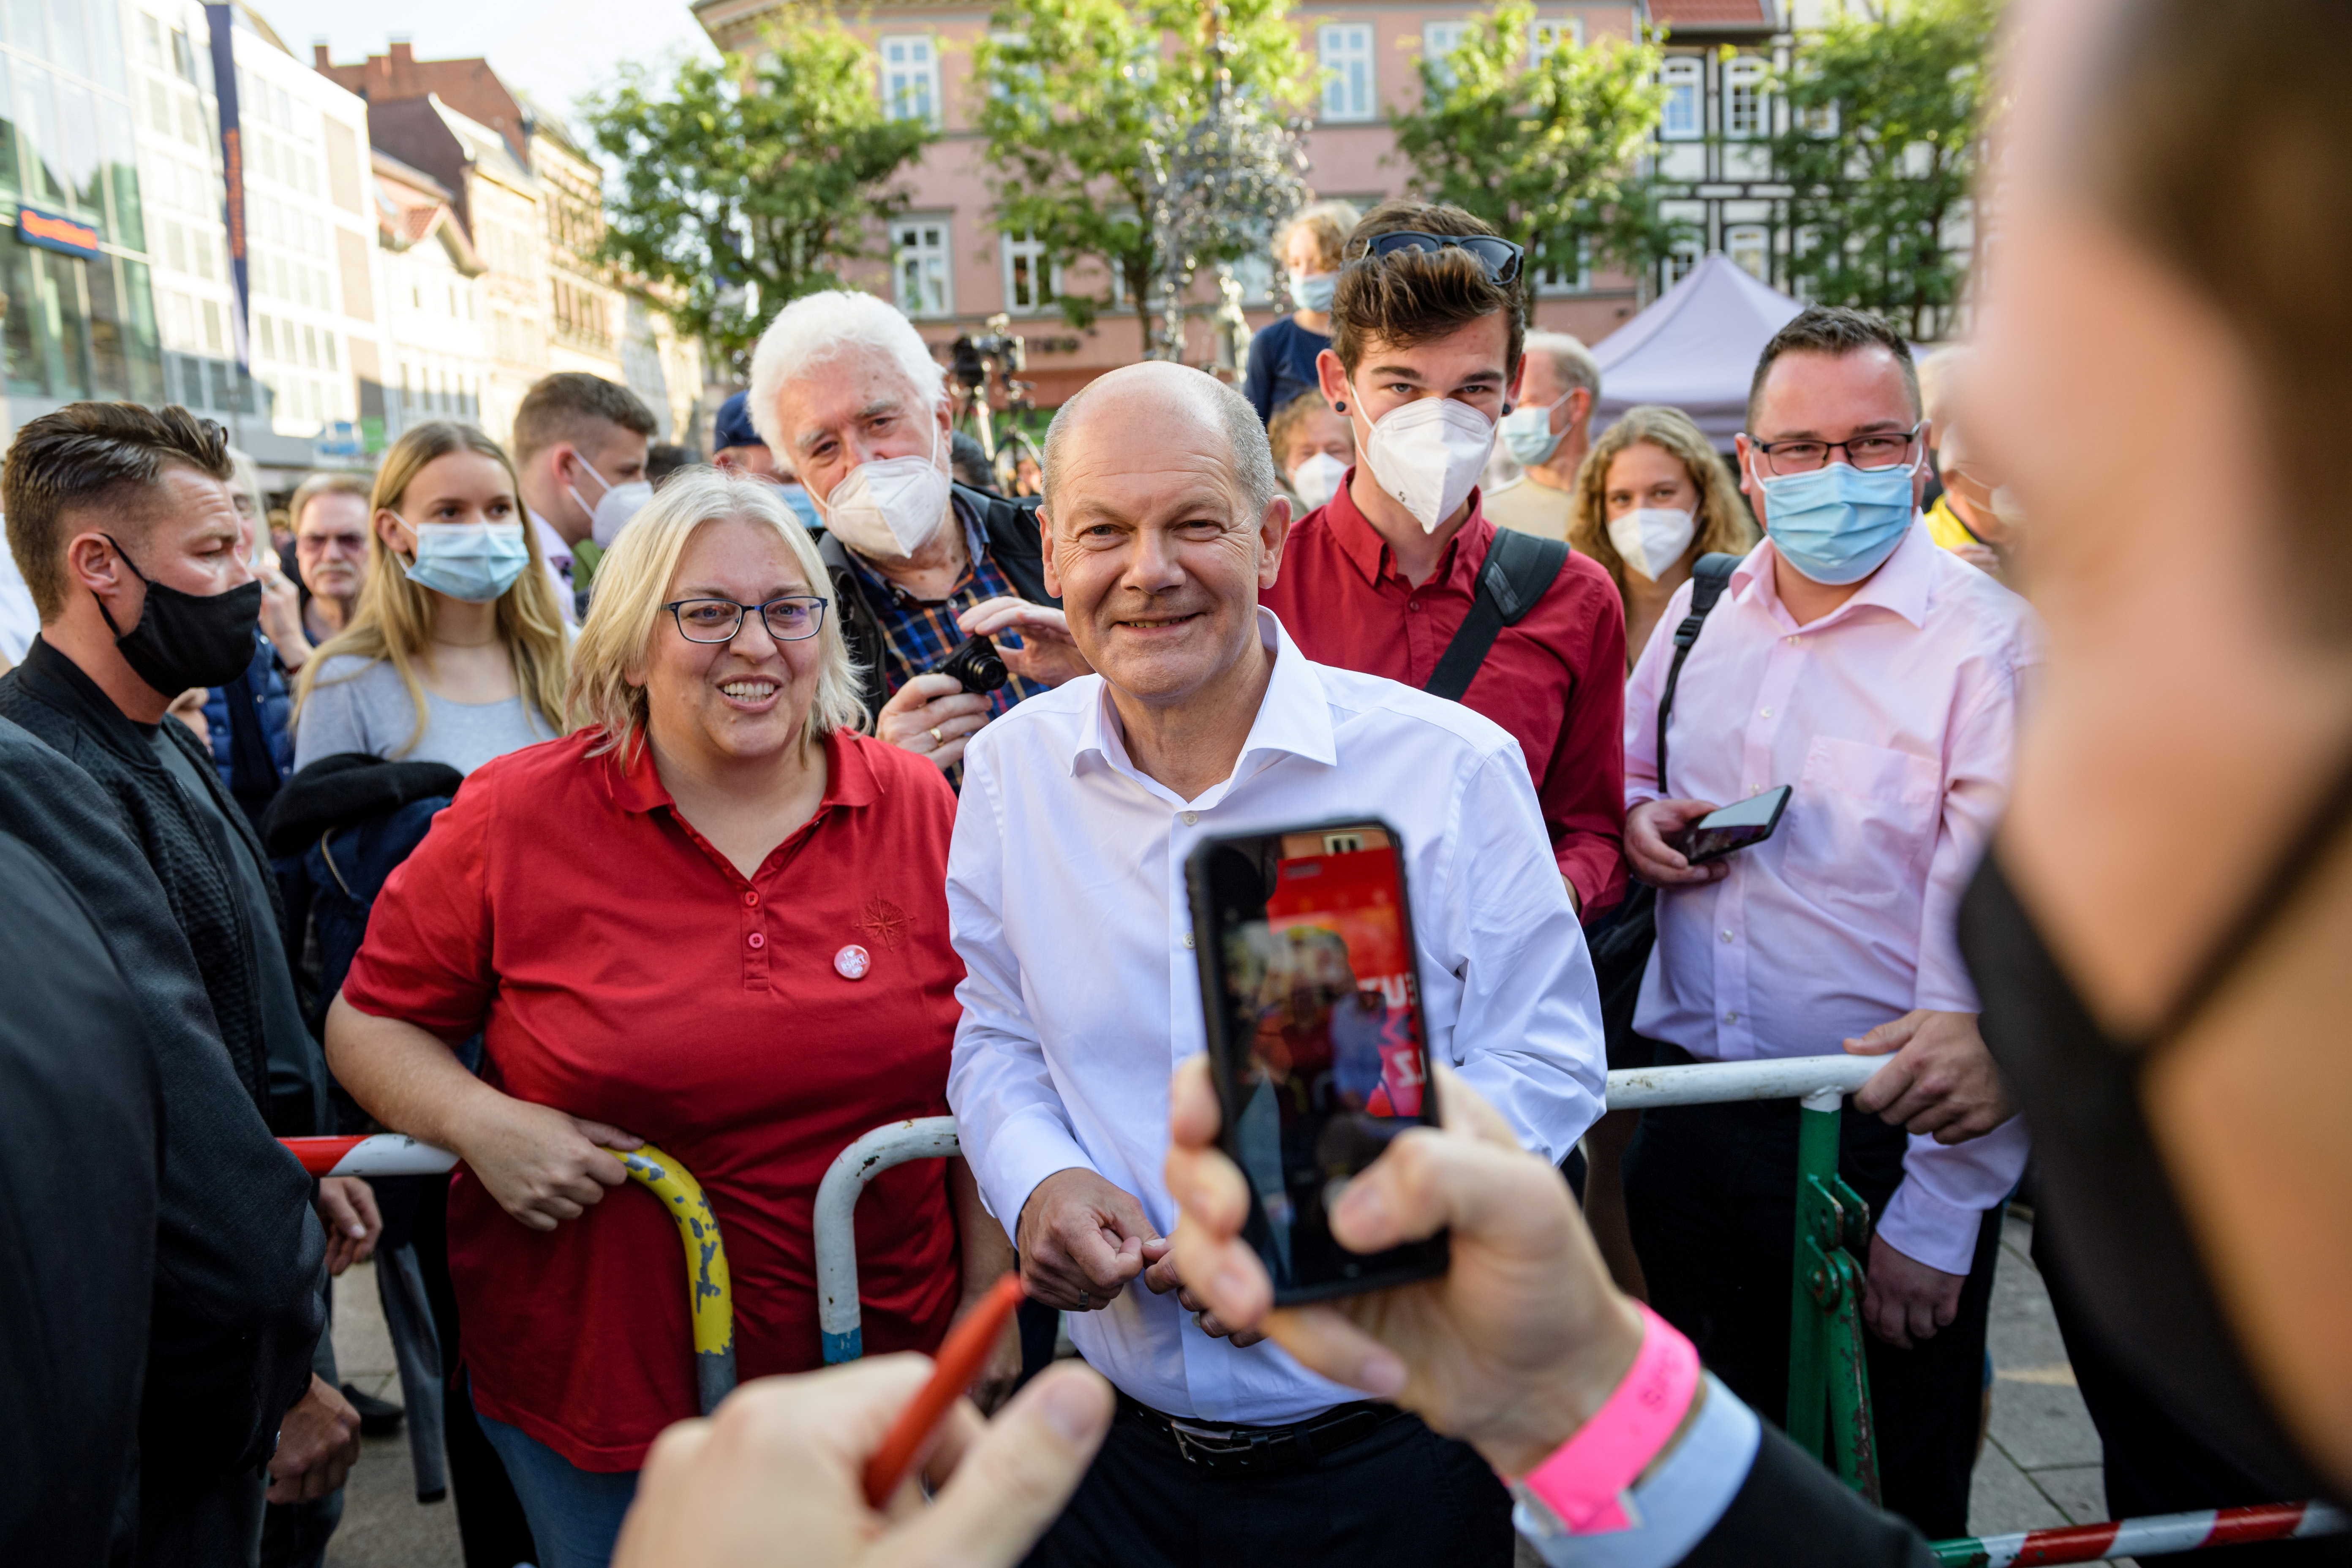 SPD chancellor candidate Olaf Scholz campaigns in Goettingen